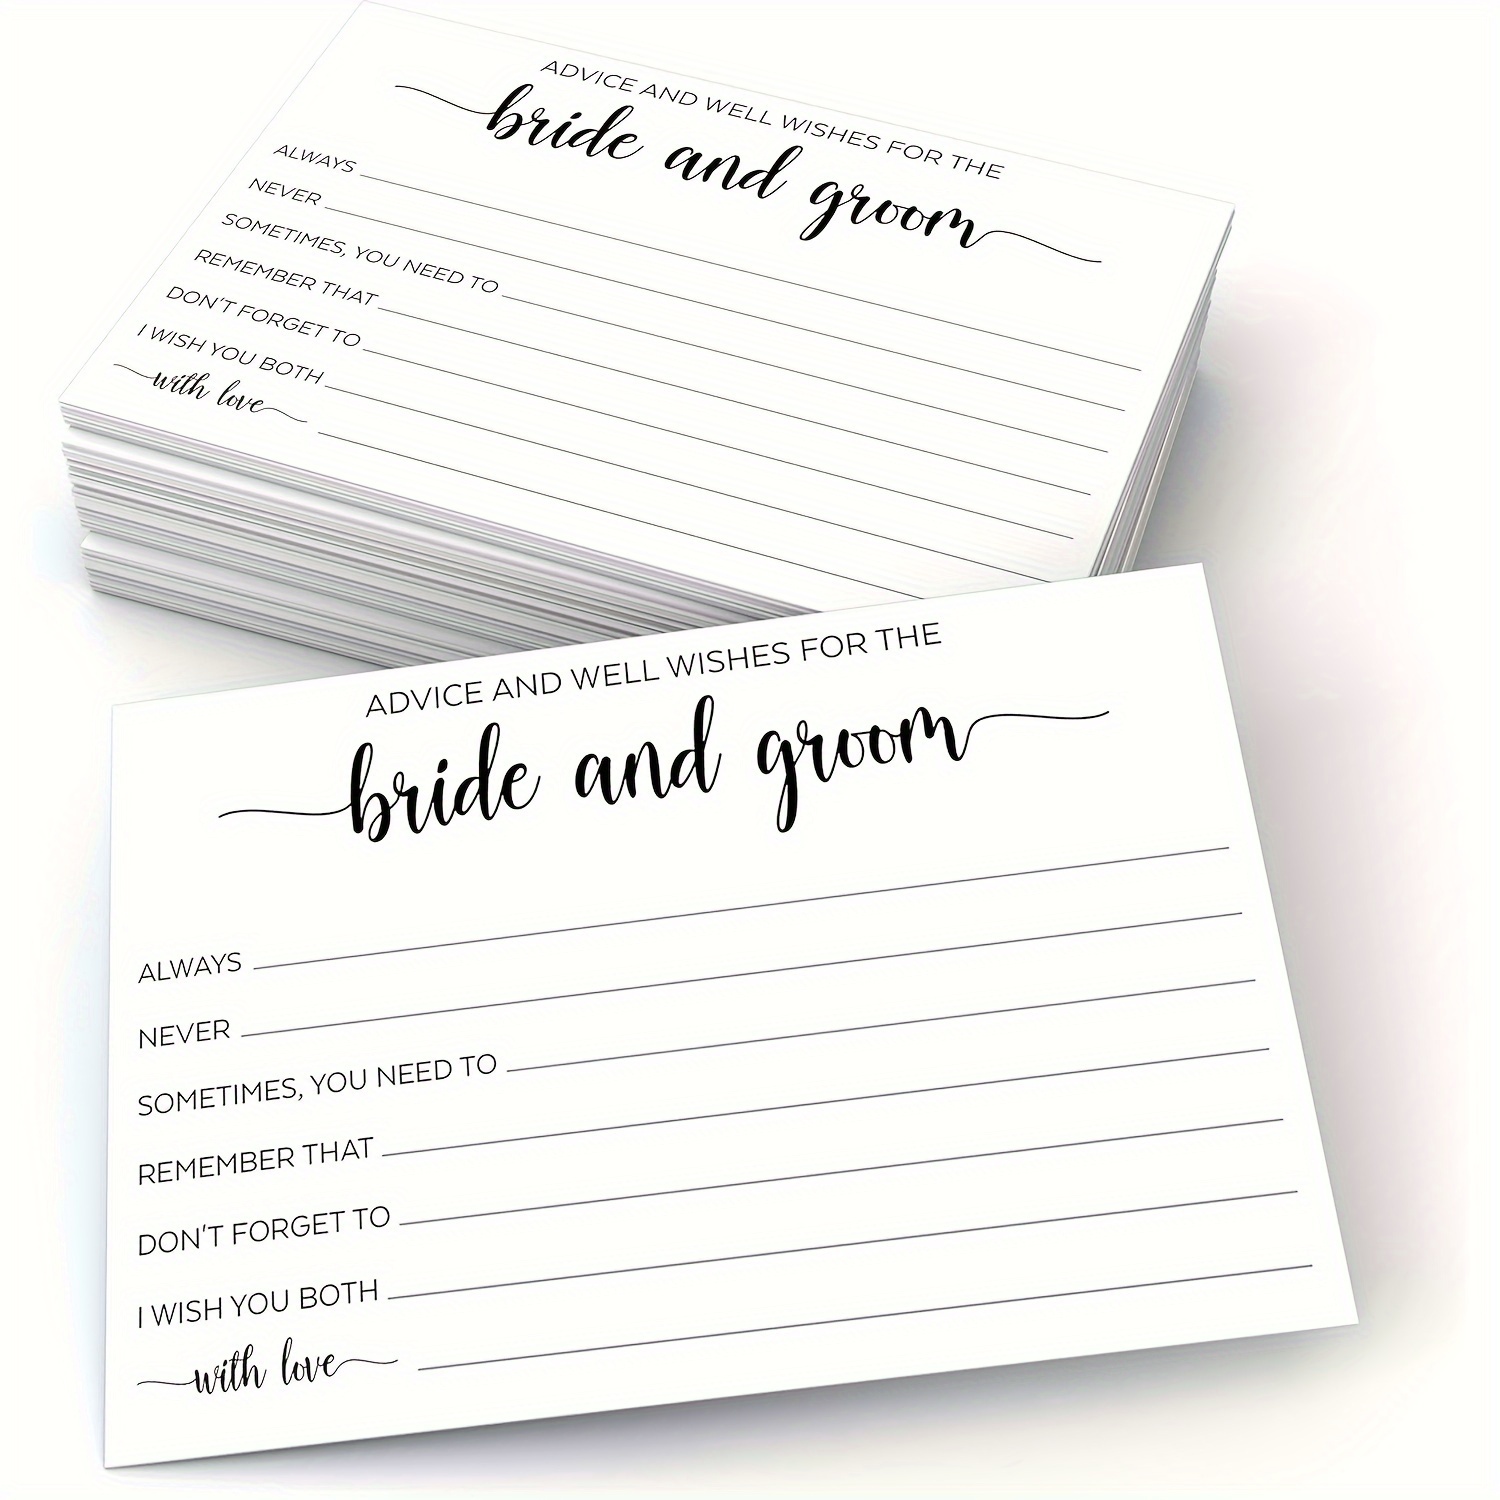 

50pcs Advice And Wishes Cards Advice For The Bride & Groom Mr And Mrs 4x6 White Wedding Advice Cards For Wedding Reception Decorations Bridal Shower